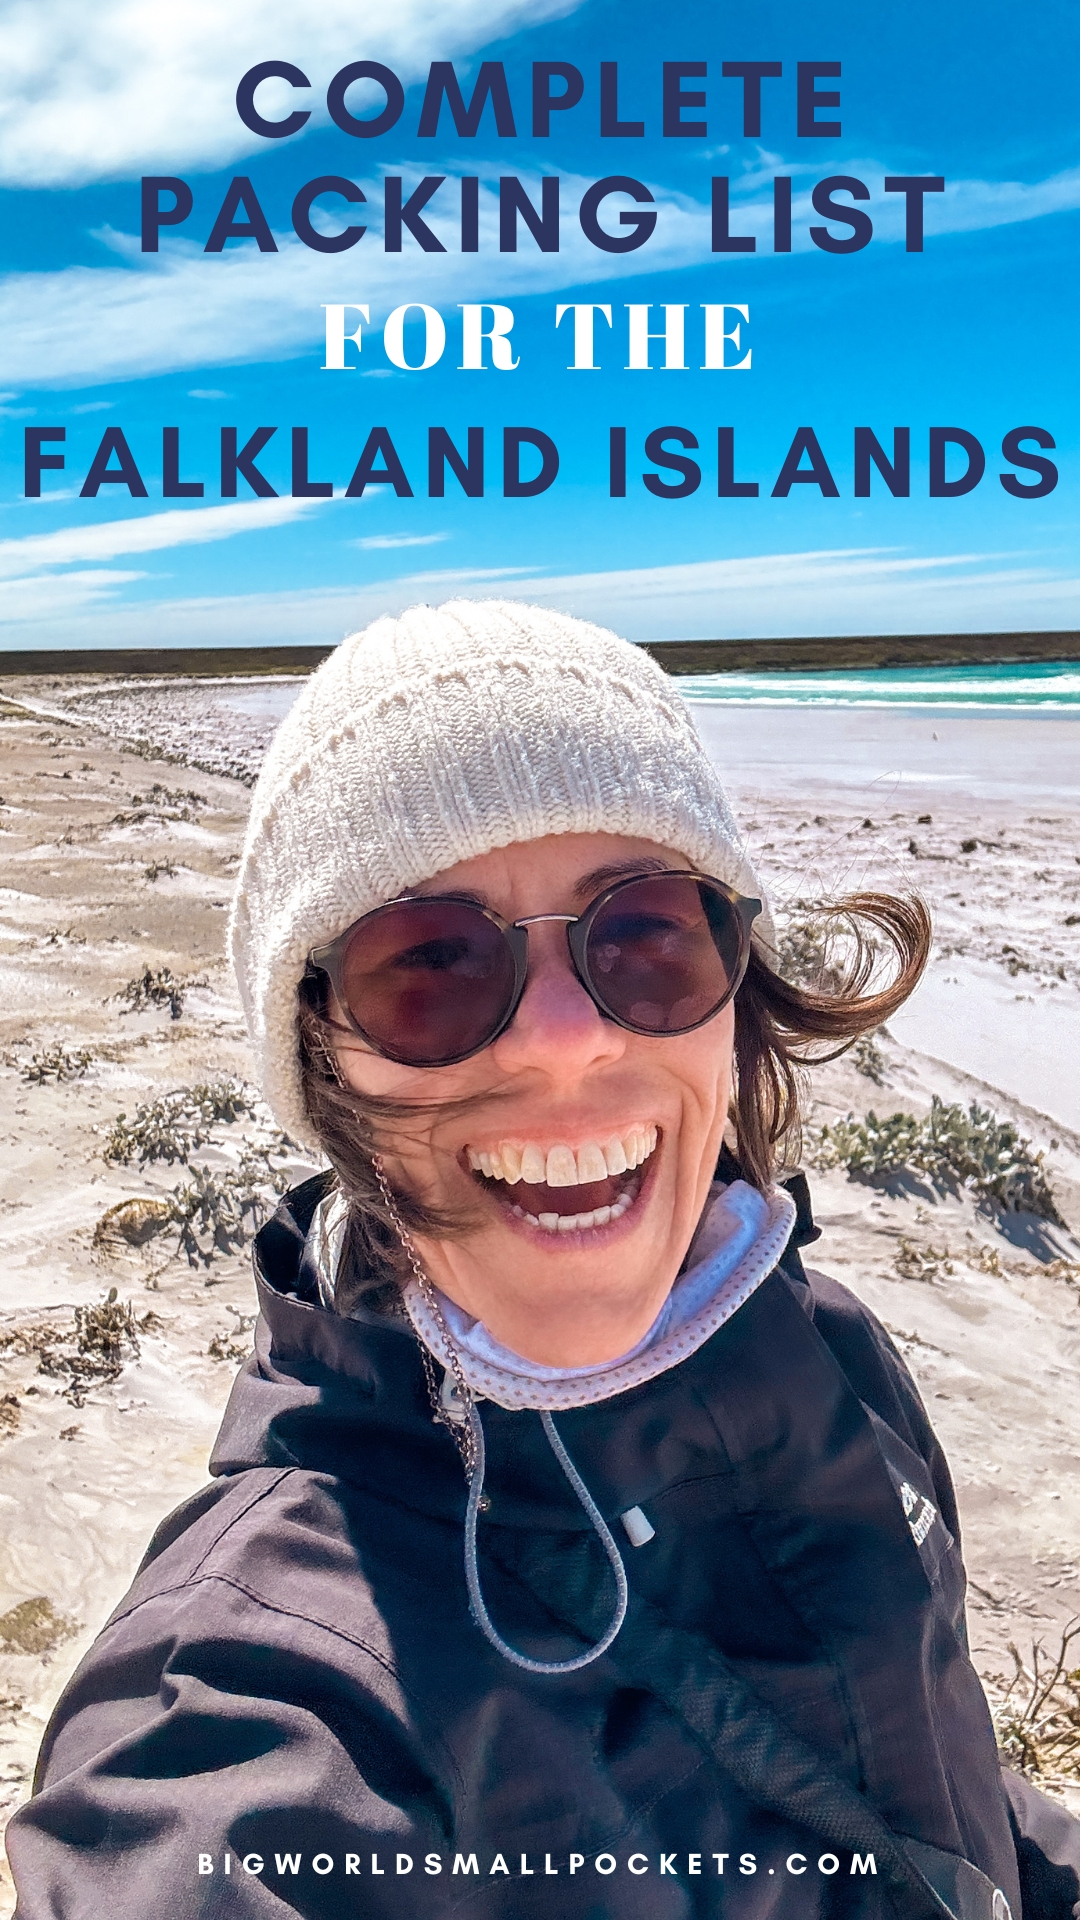 Complete Packing List for the Falkland Islands